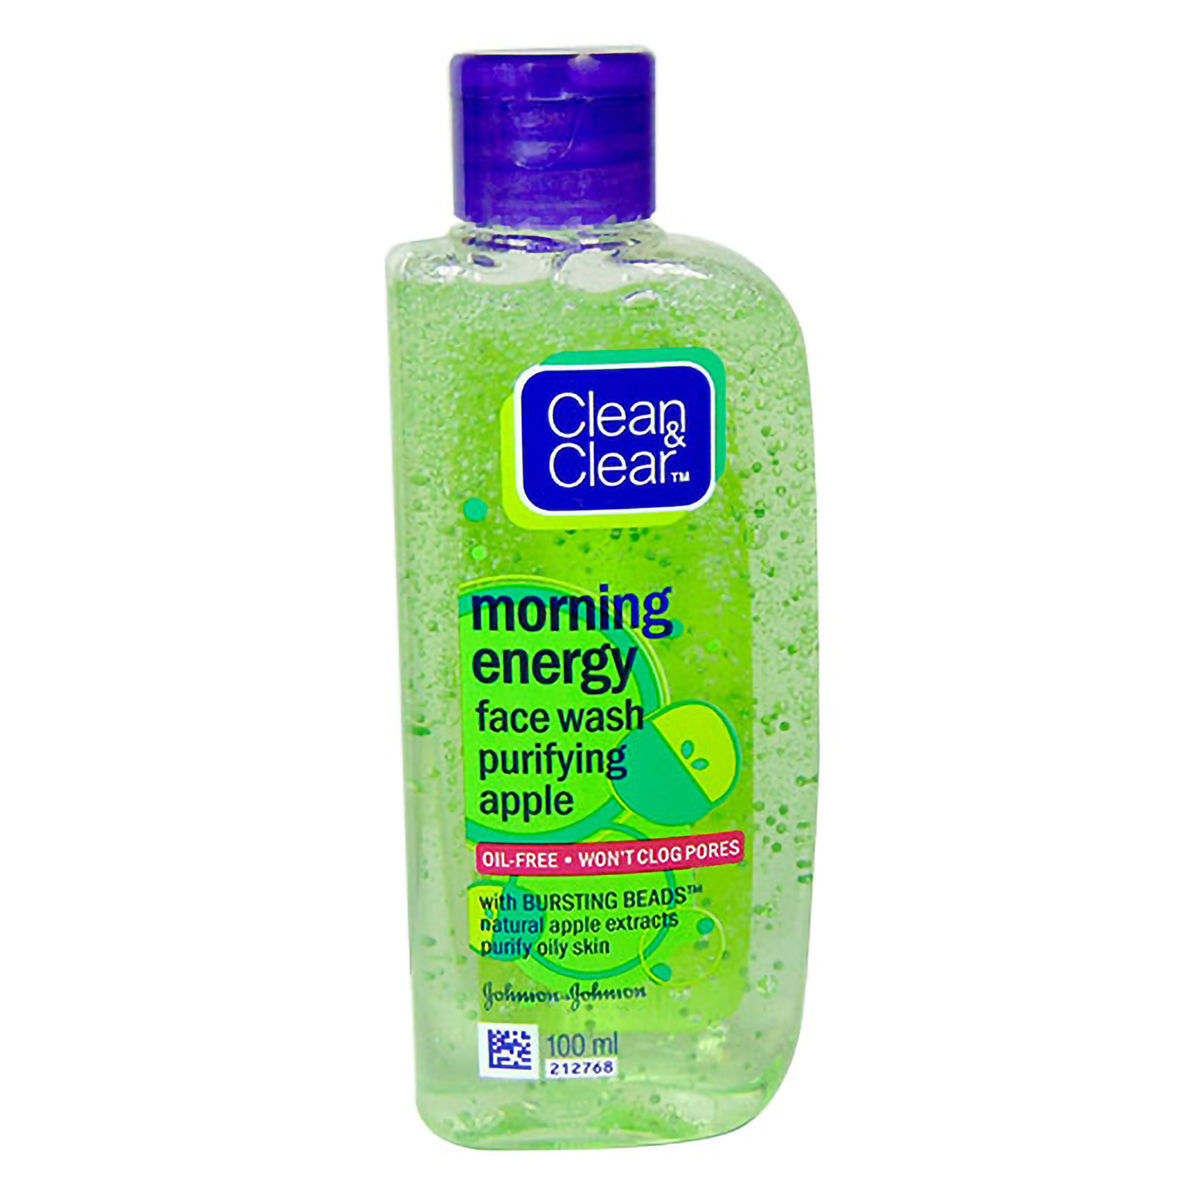 Buy Clean & Clear Morning Energy Purifying Apple Face Wash 100 ml | Natural Apple Extract | Purifies Oily Skin | Gives Clean, Clear & Beautiful Skin Online